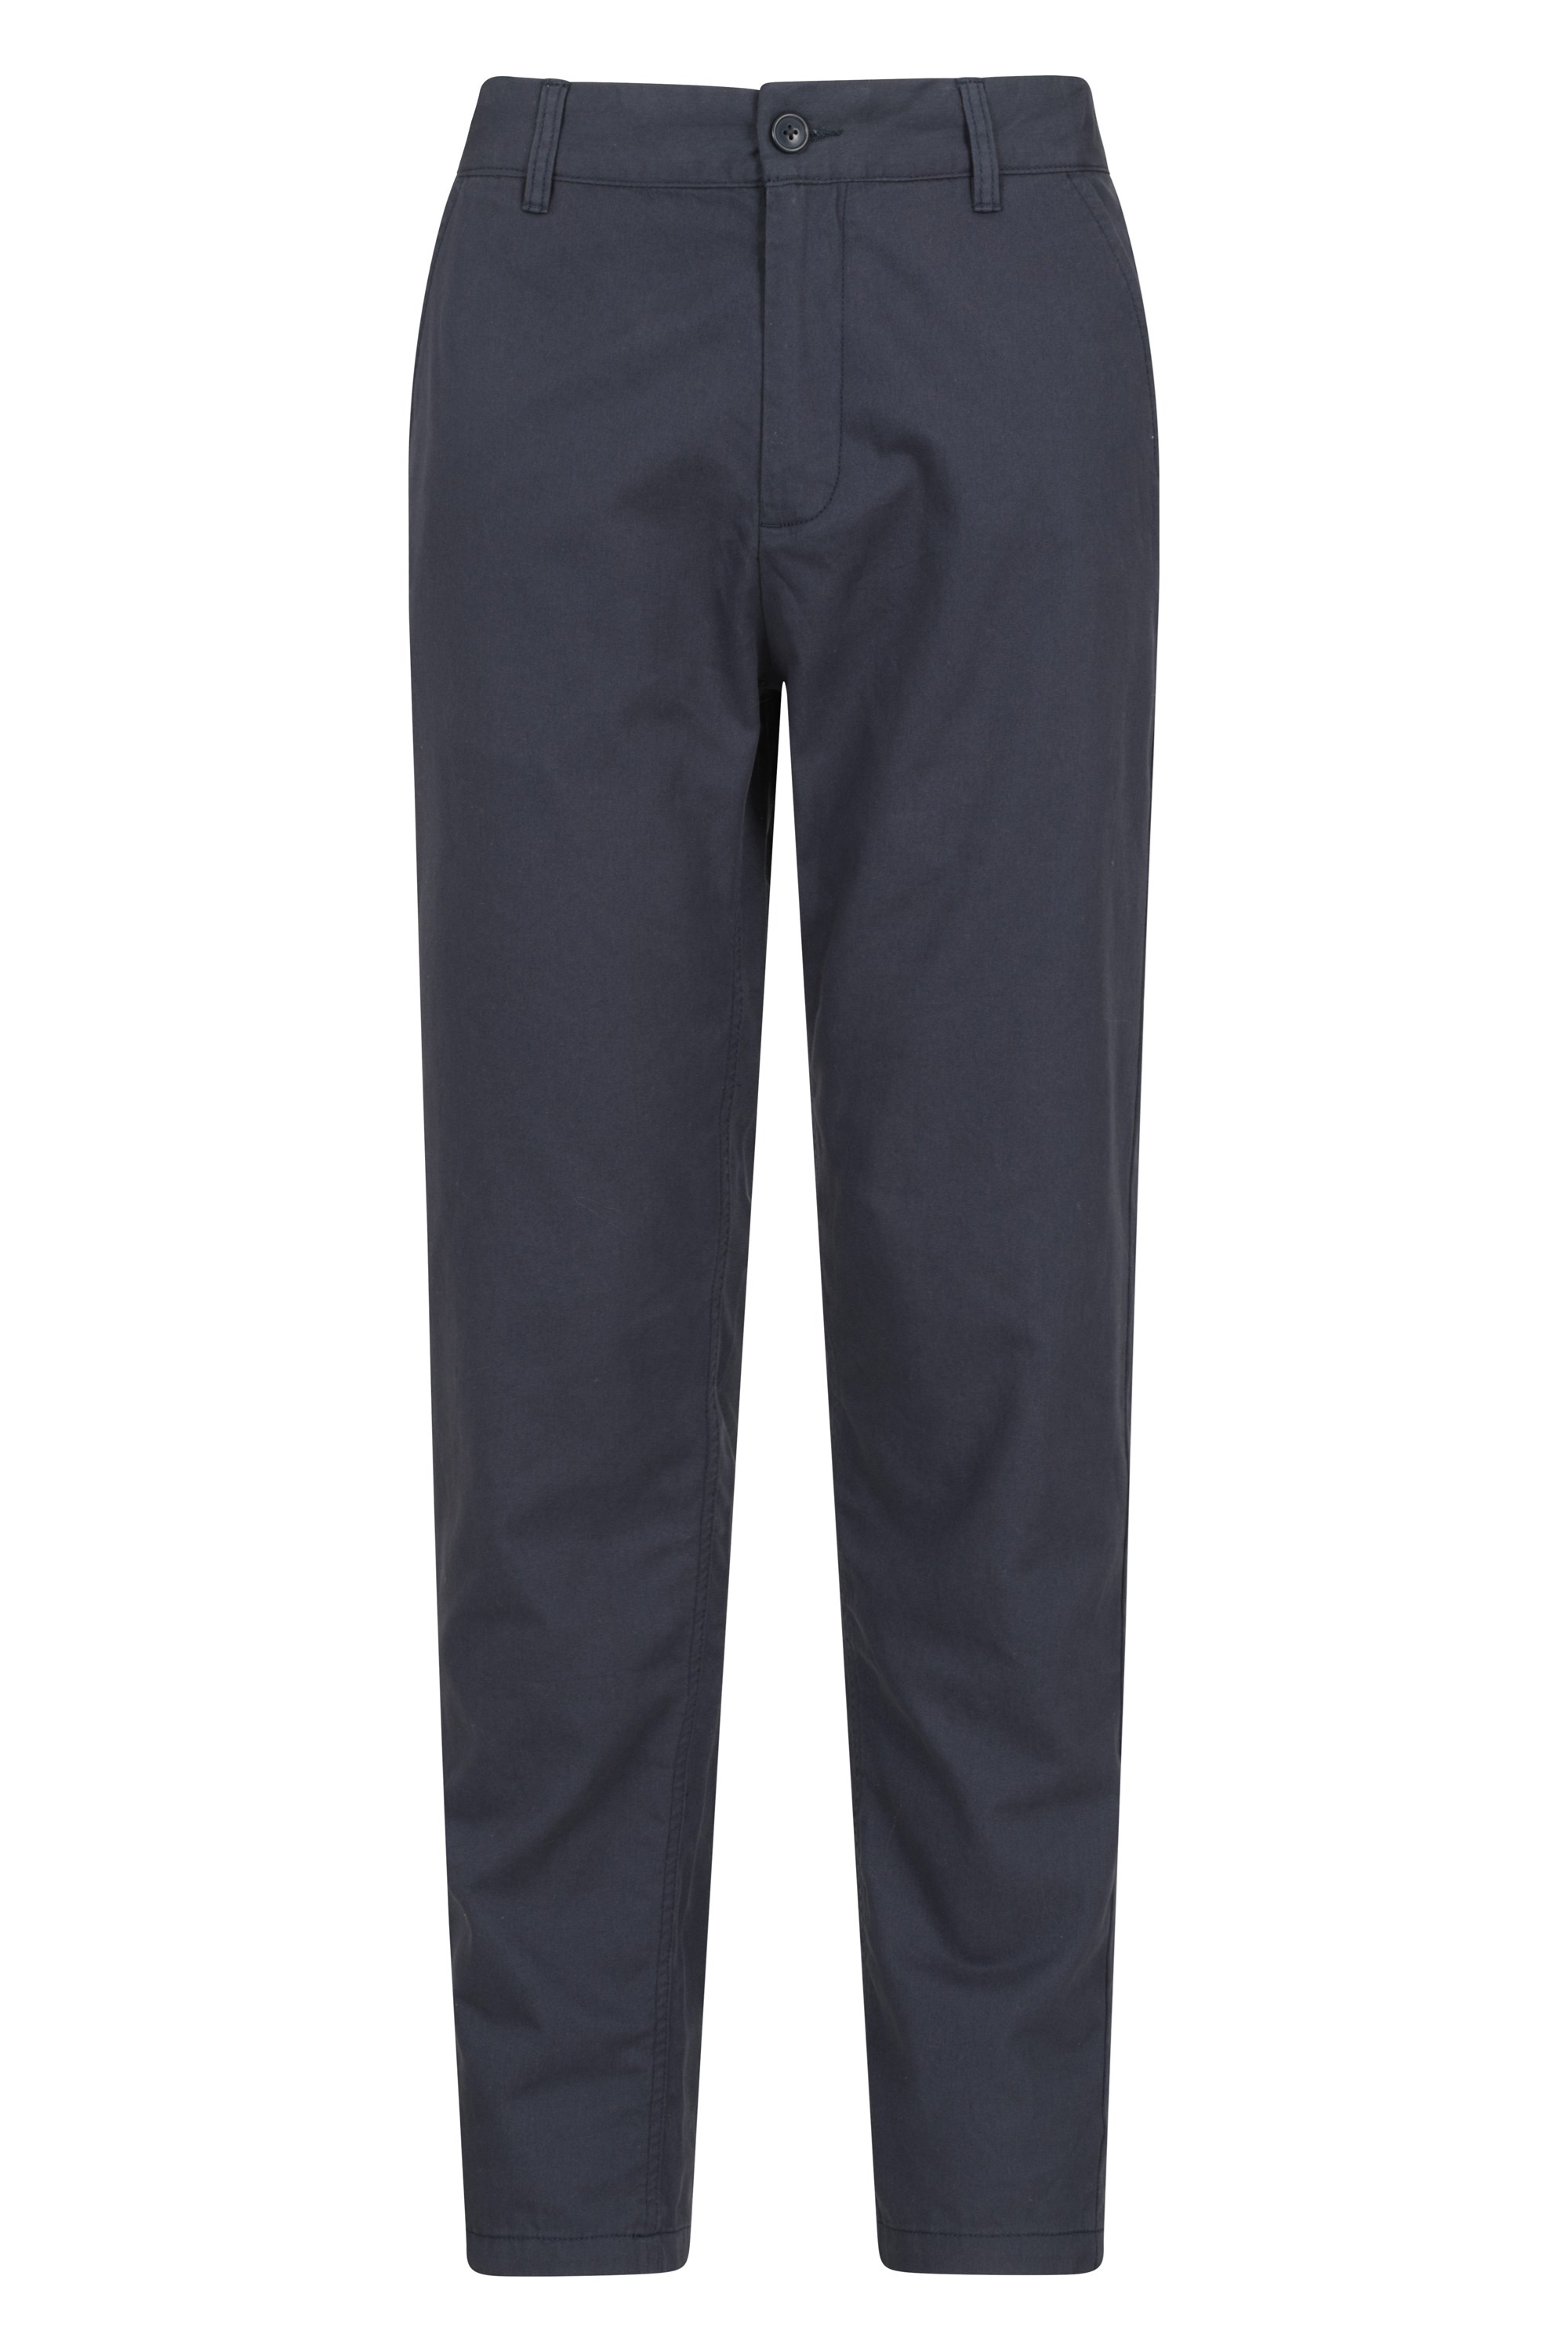 Lakeside Mens Chino Trousers - Navy